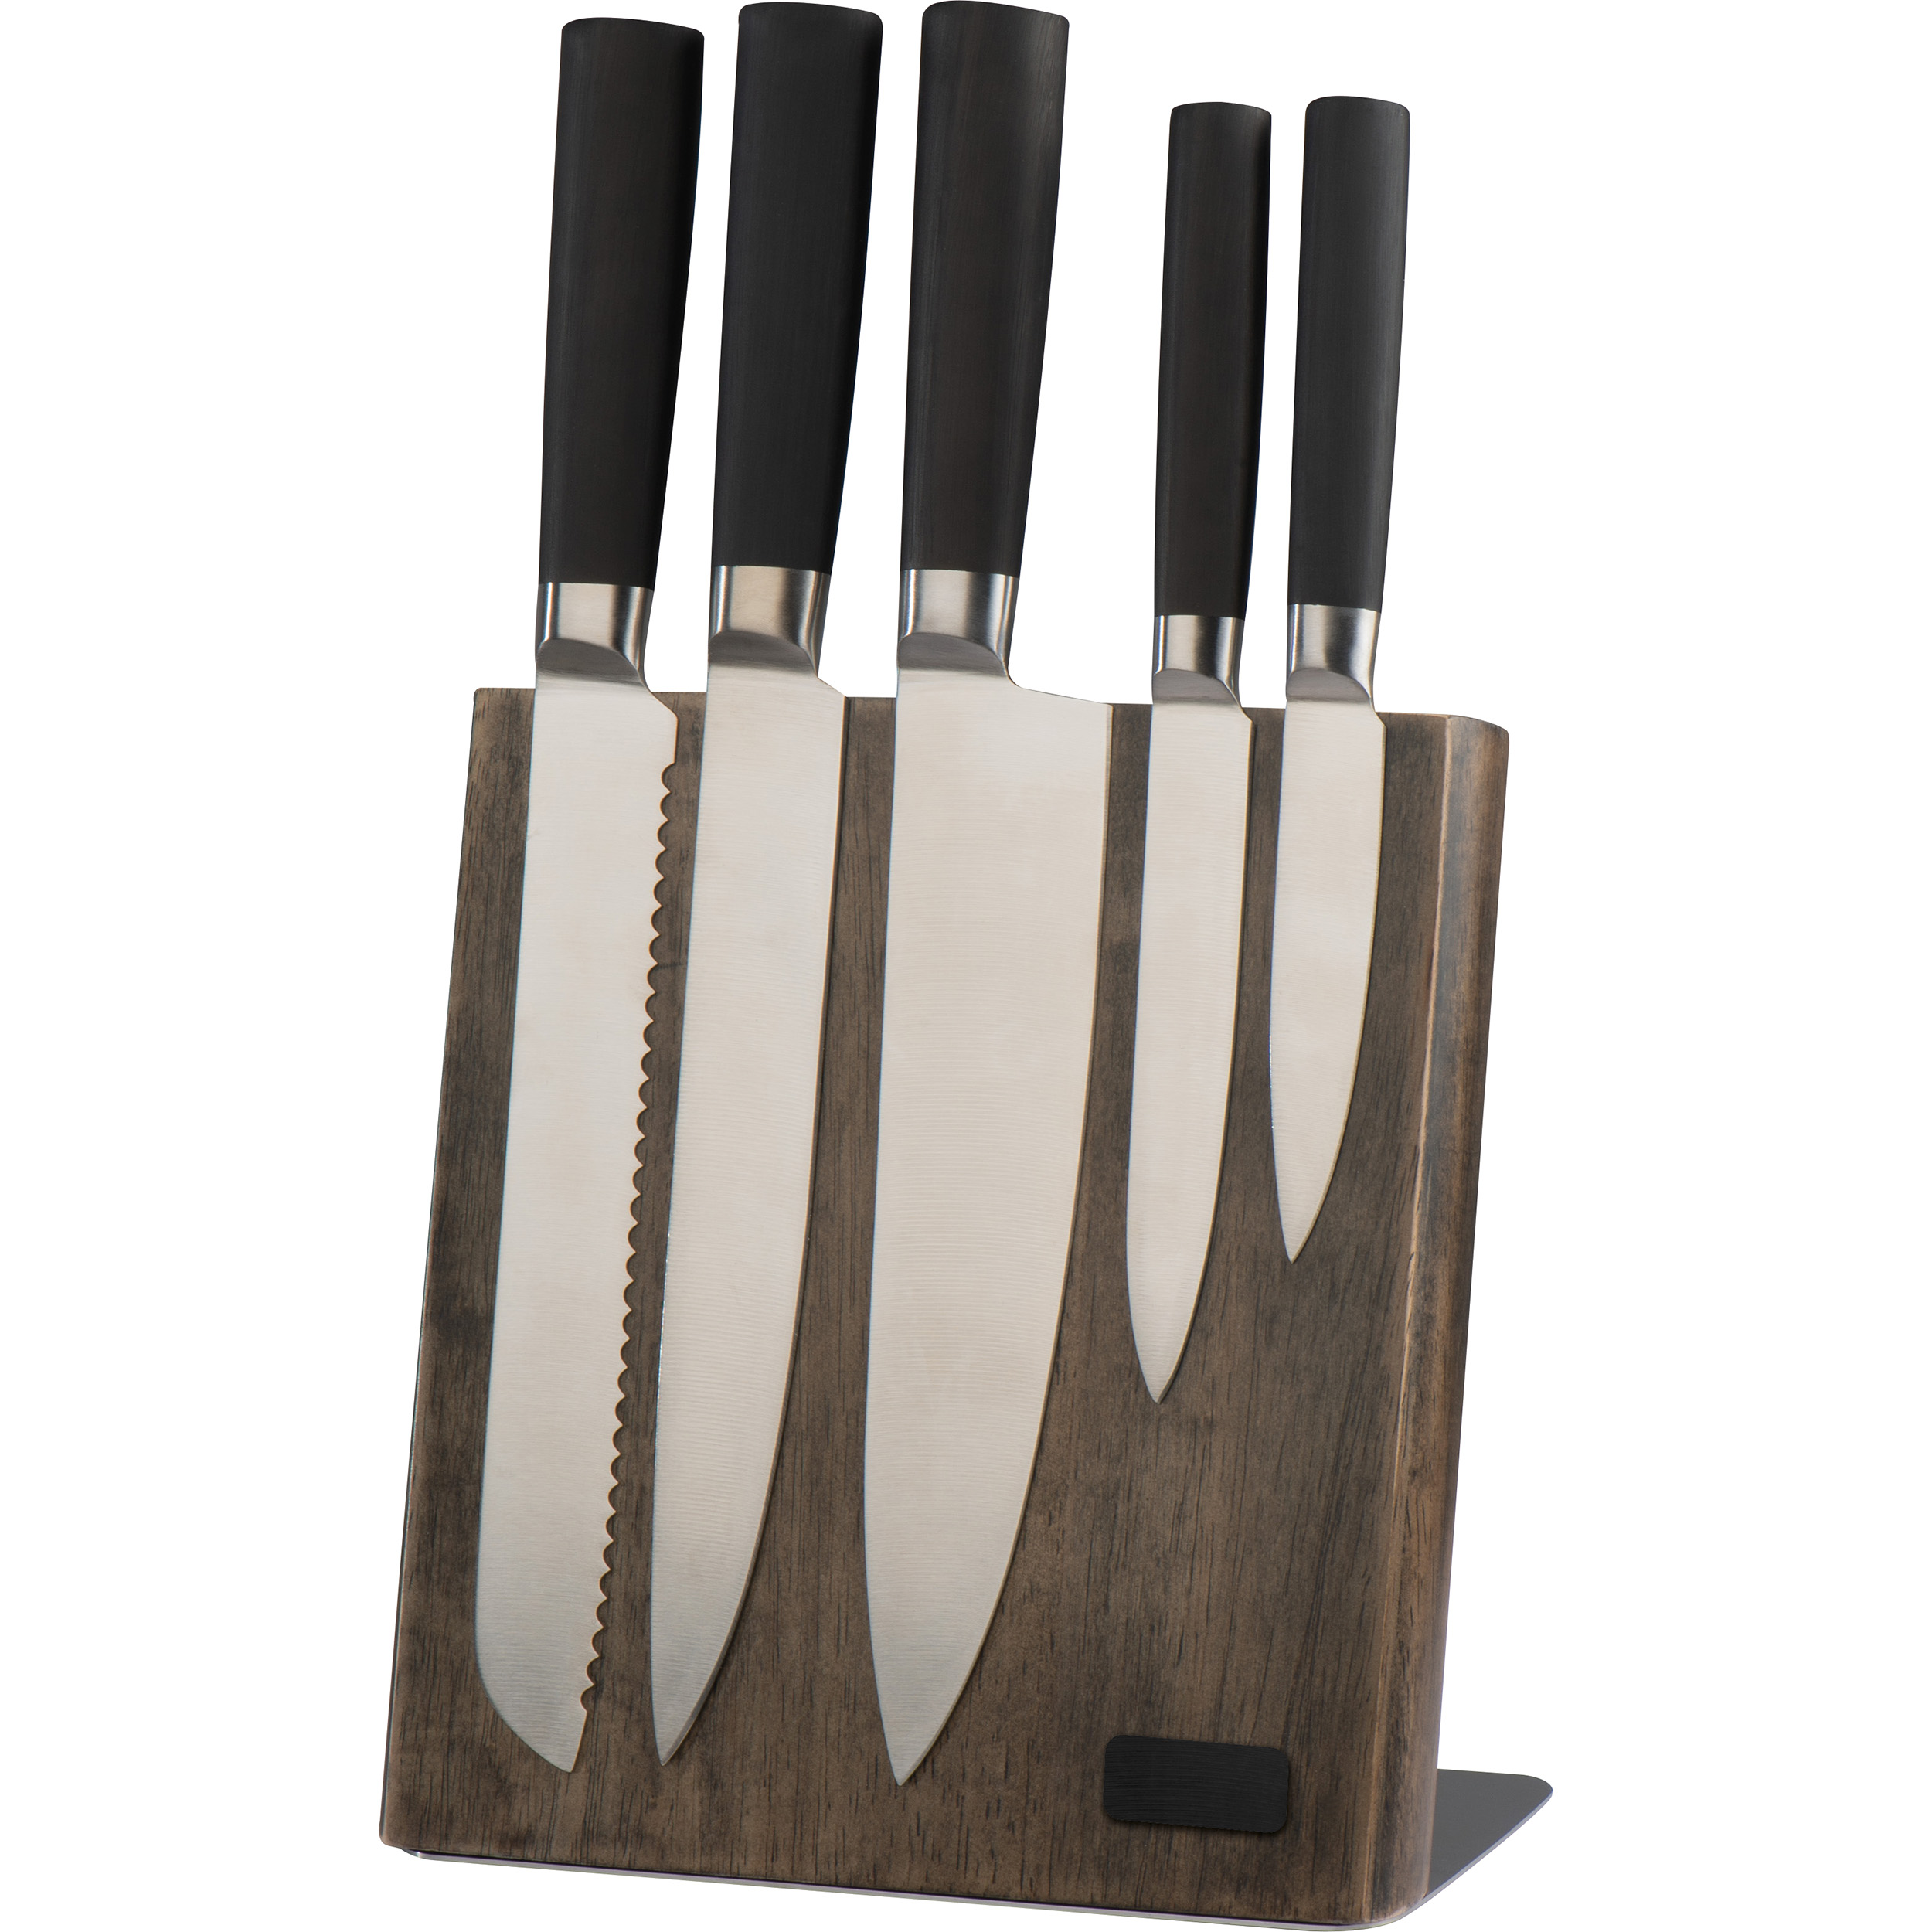 Knife block with 5 kinves